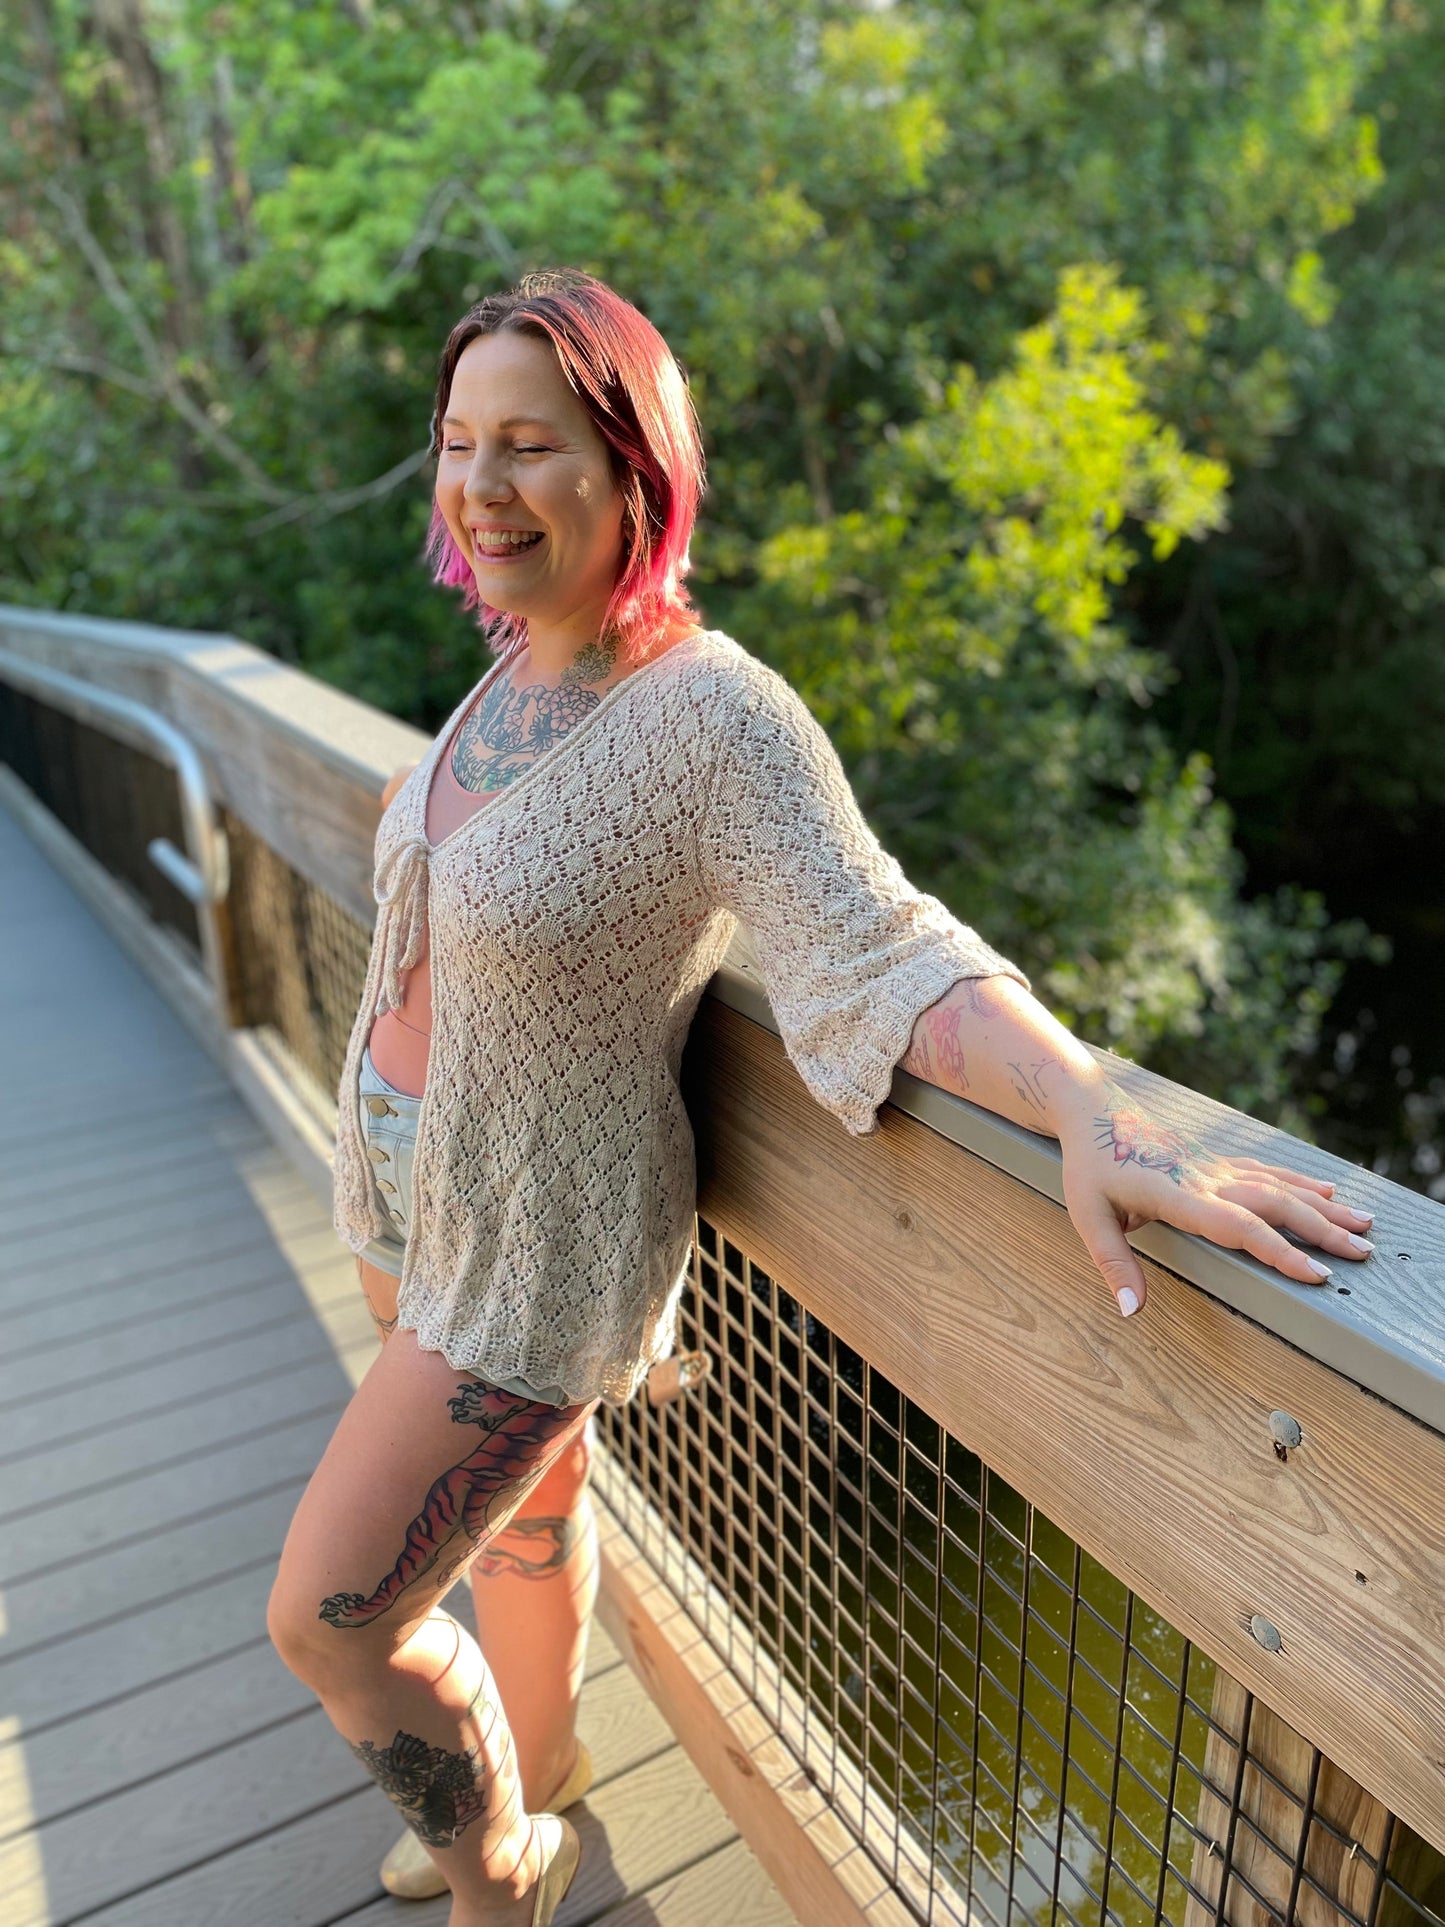 Seen from the side at a 3/4 angle, Bess leans against a wooden bridge railing. She wears a white cardigan, knit in a lace stitch with 3/4 length flared sleeves and a scalloped hem. The front is closed with a simple tie.